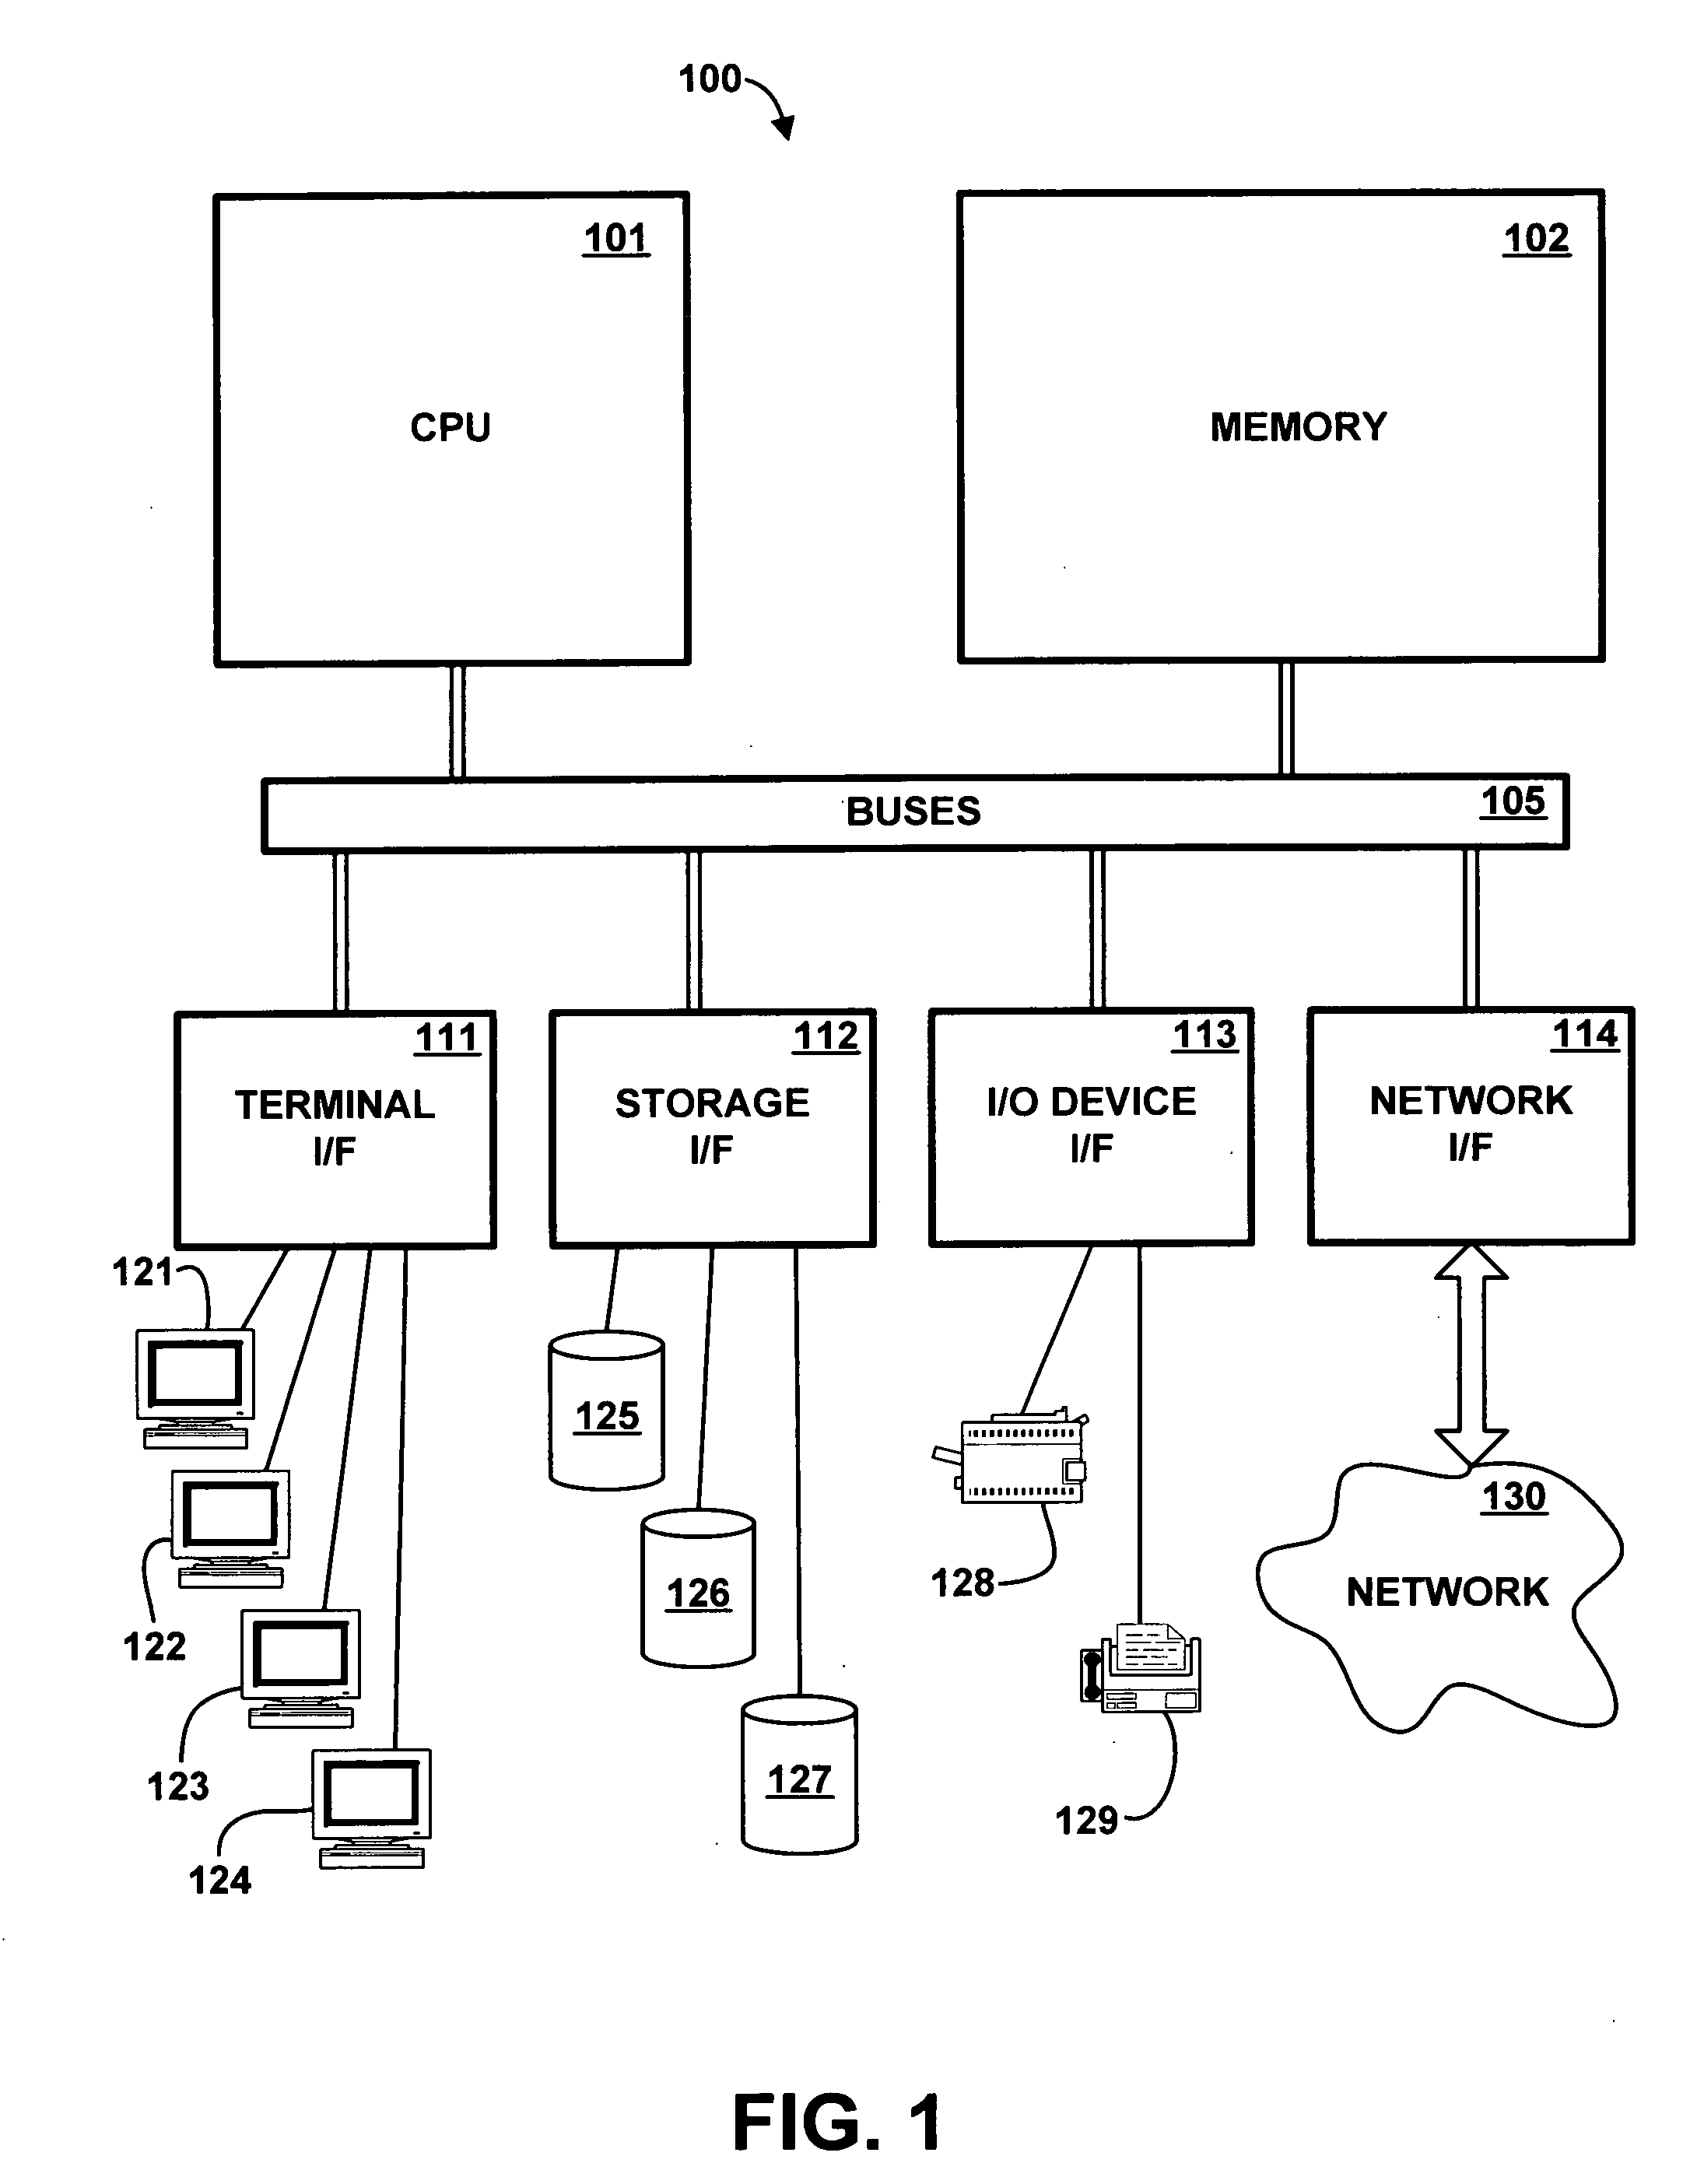 Method and apparatus for automatically detecting a latent referential integrity relationship between different tables of a database